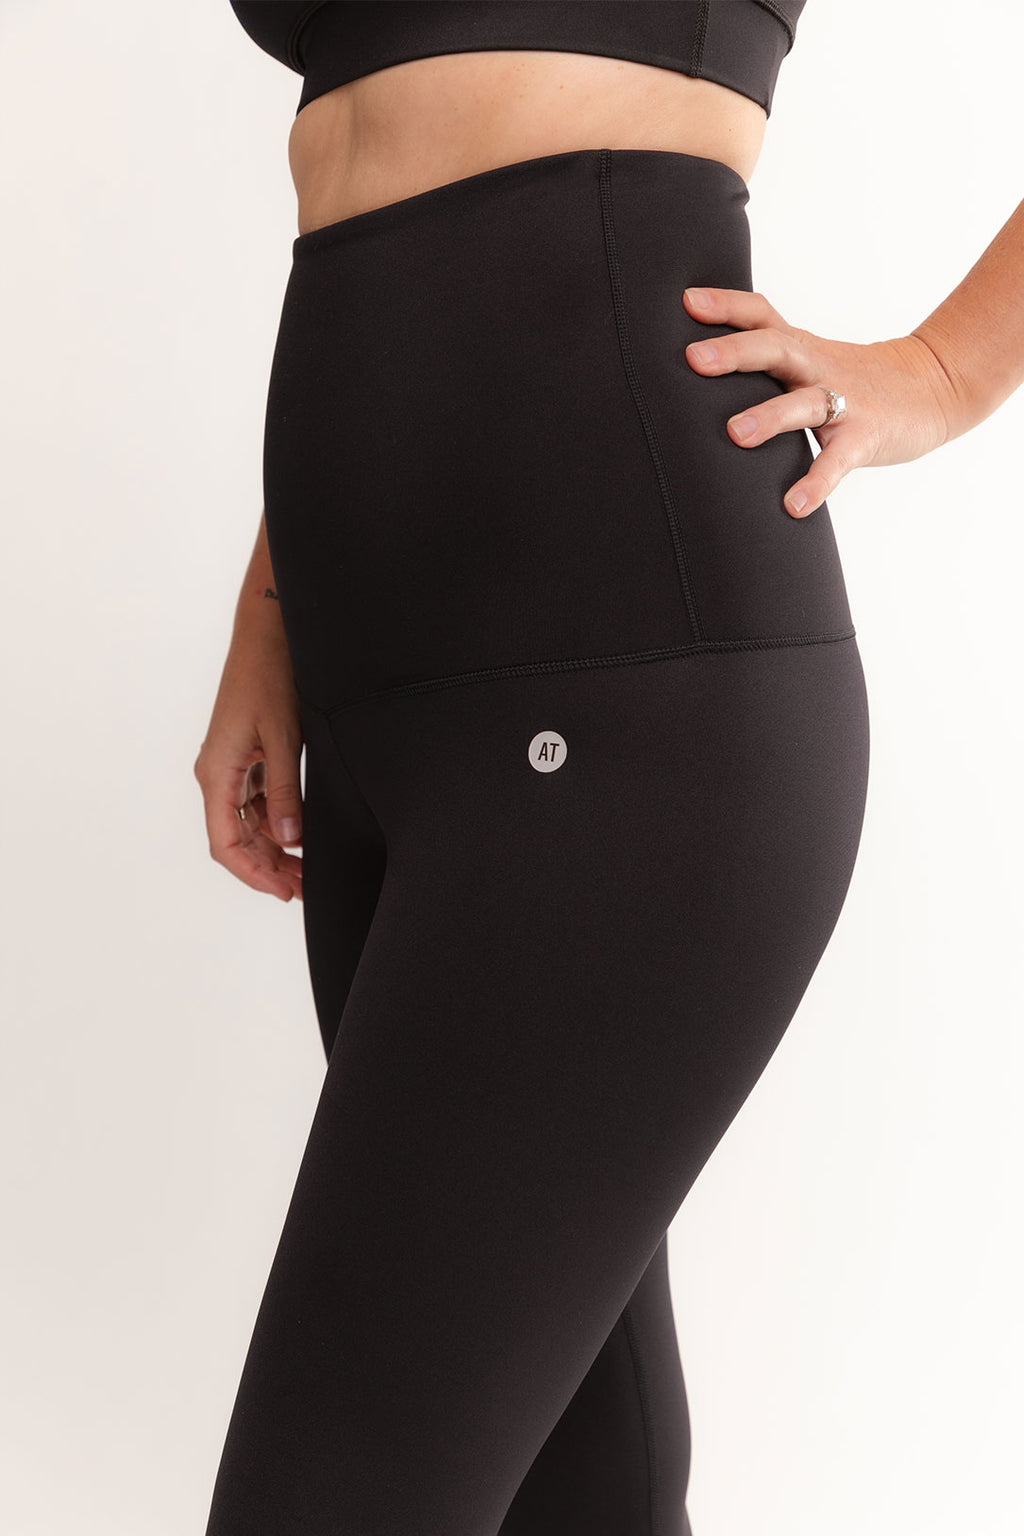 Postnatal Recovery Full Length Tight - Black from Active Truth™
